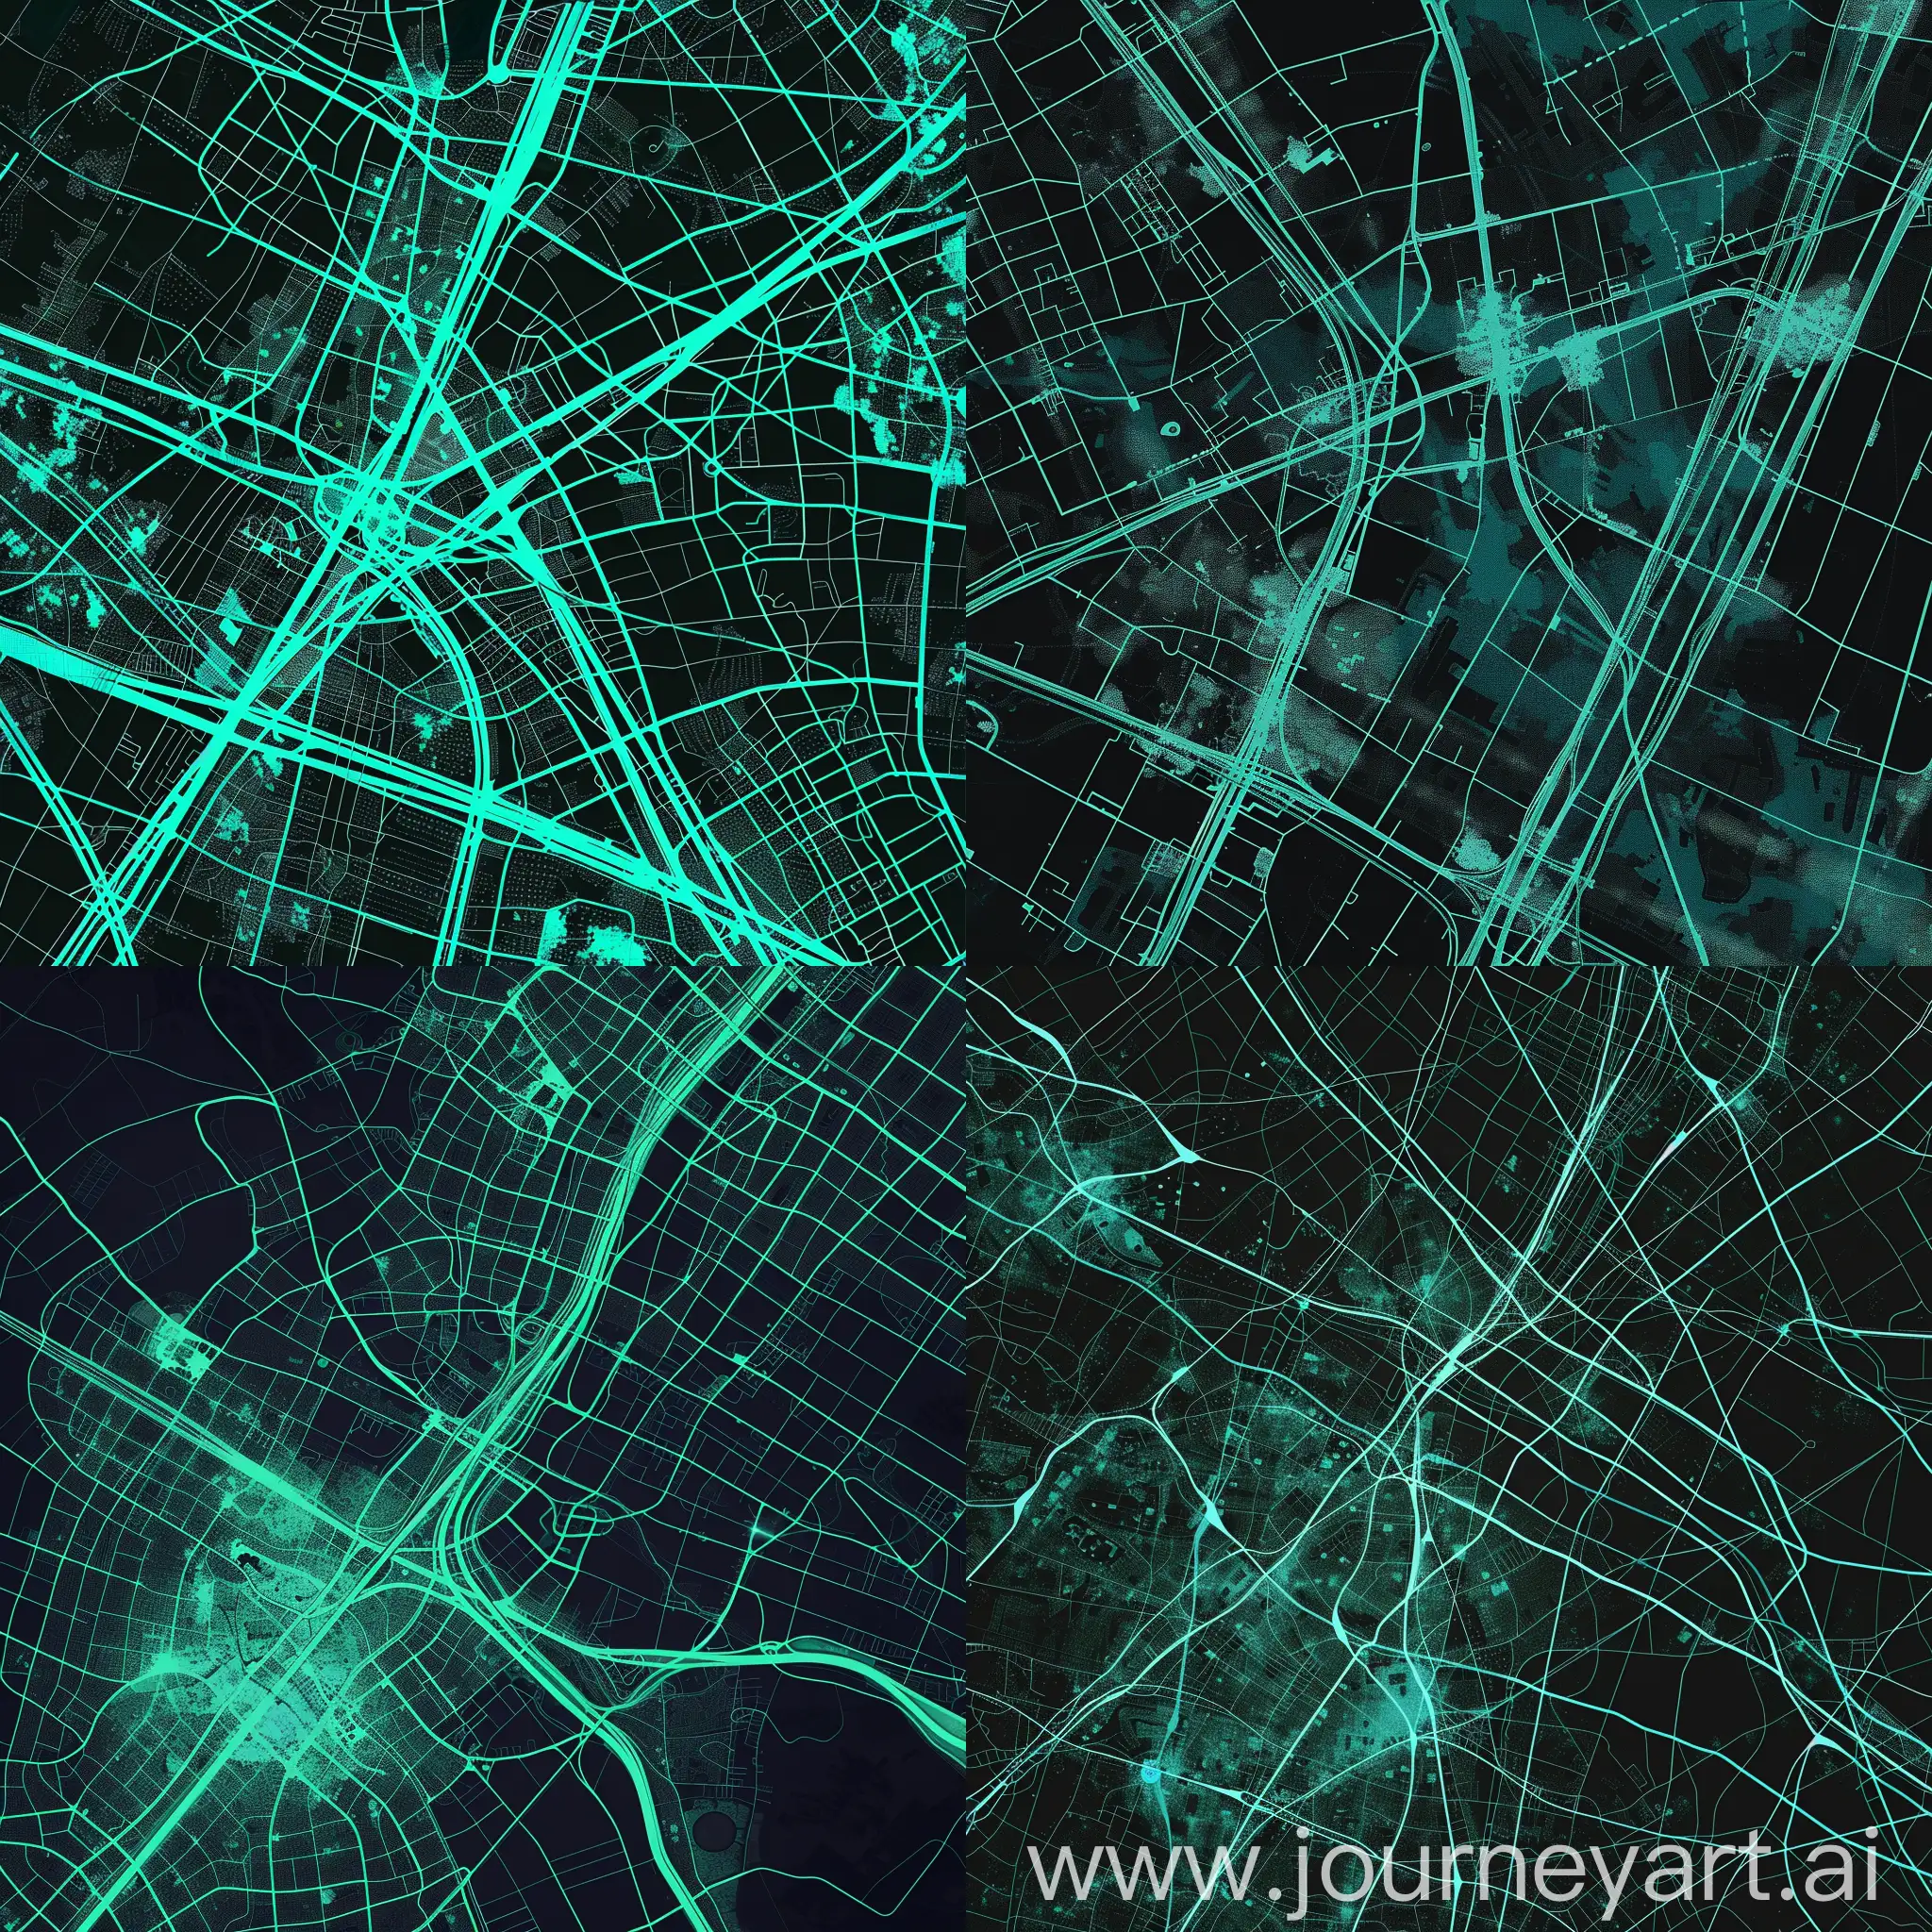 urban traffic patterns  overlaying road network data onto geographical maps to derive meaningful insights about traffic flow and congestion hotspots with combination of aqua grene an black color